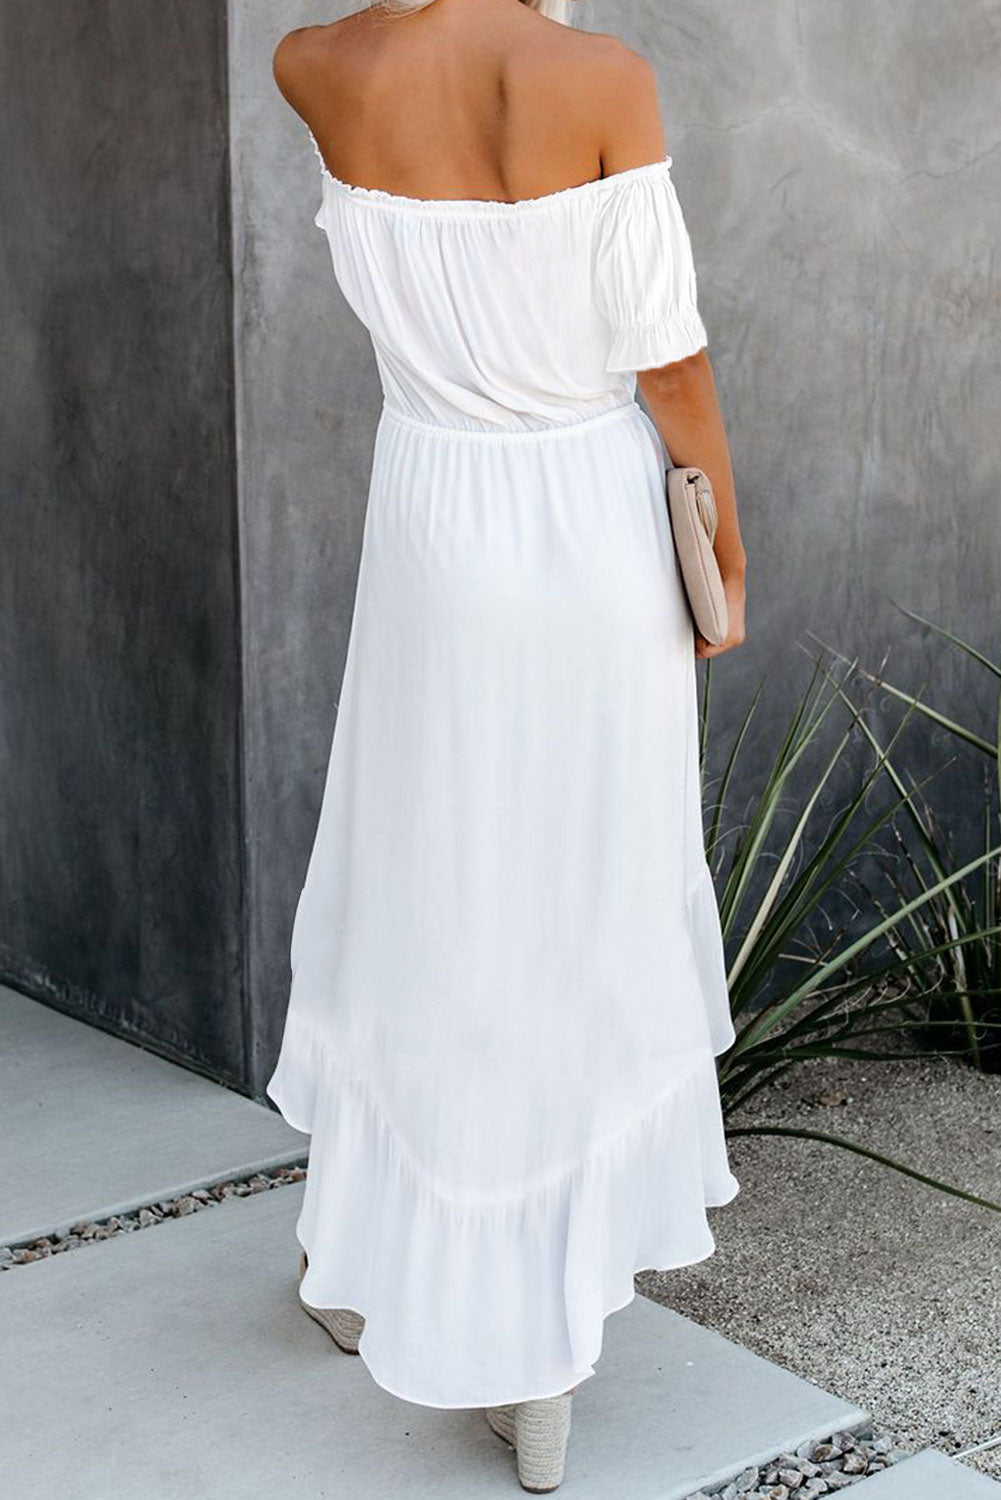 White White Off the Shoulder Dress High Low Maxi Dress  LC611566-1